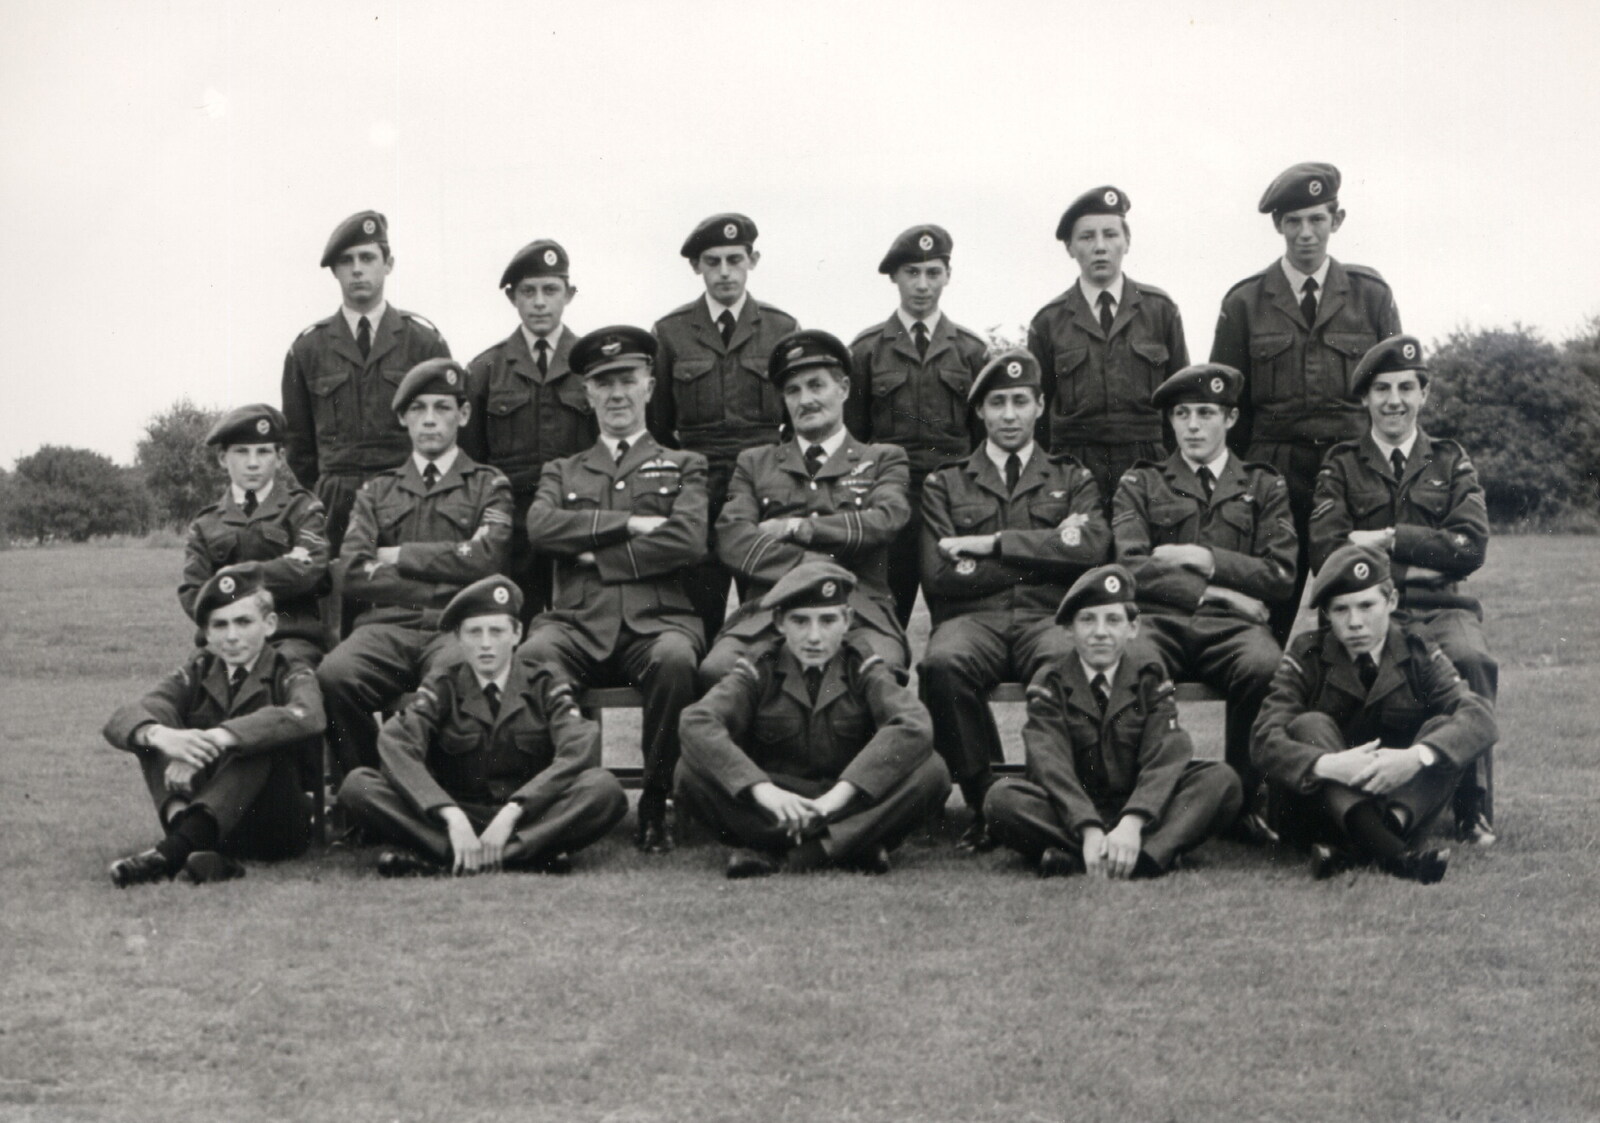 Grandad's RAF Days - Miscellaneous Dates: Unknown, 5th August 1968, 2nd from left, middle row